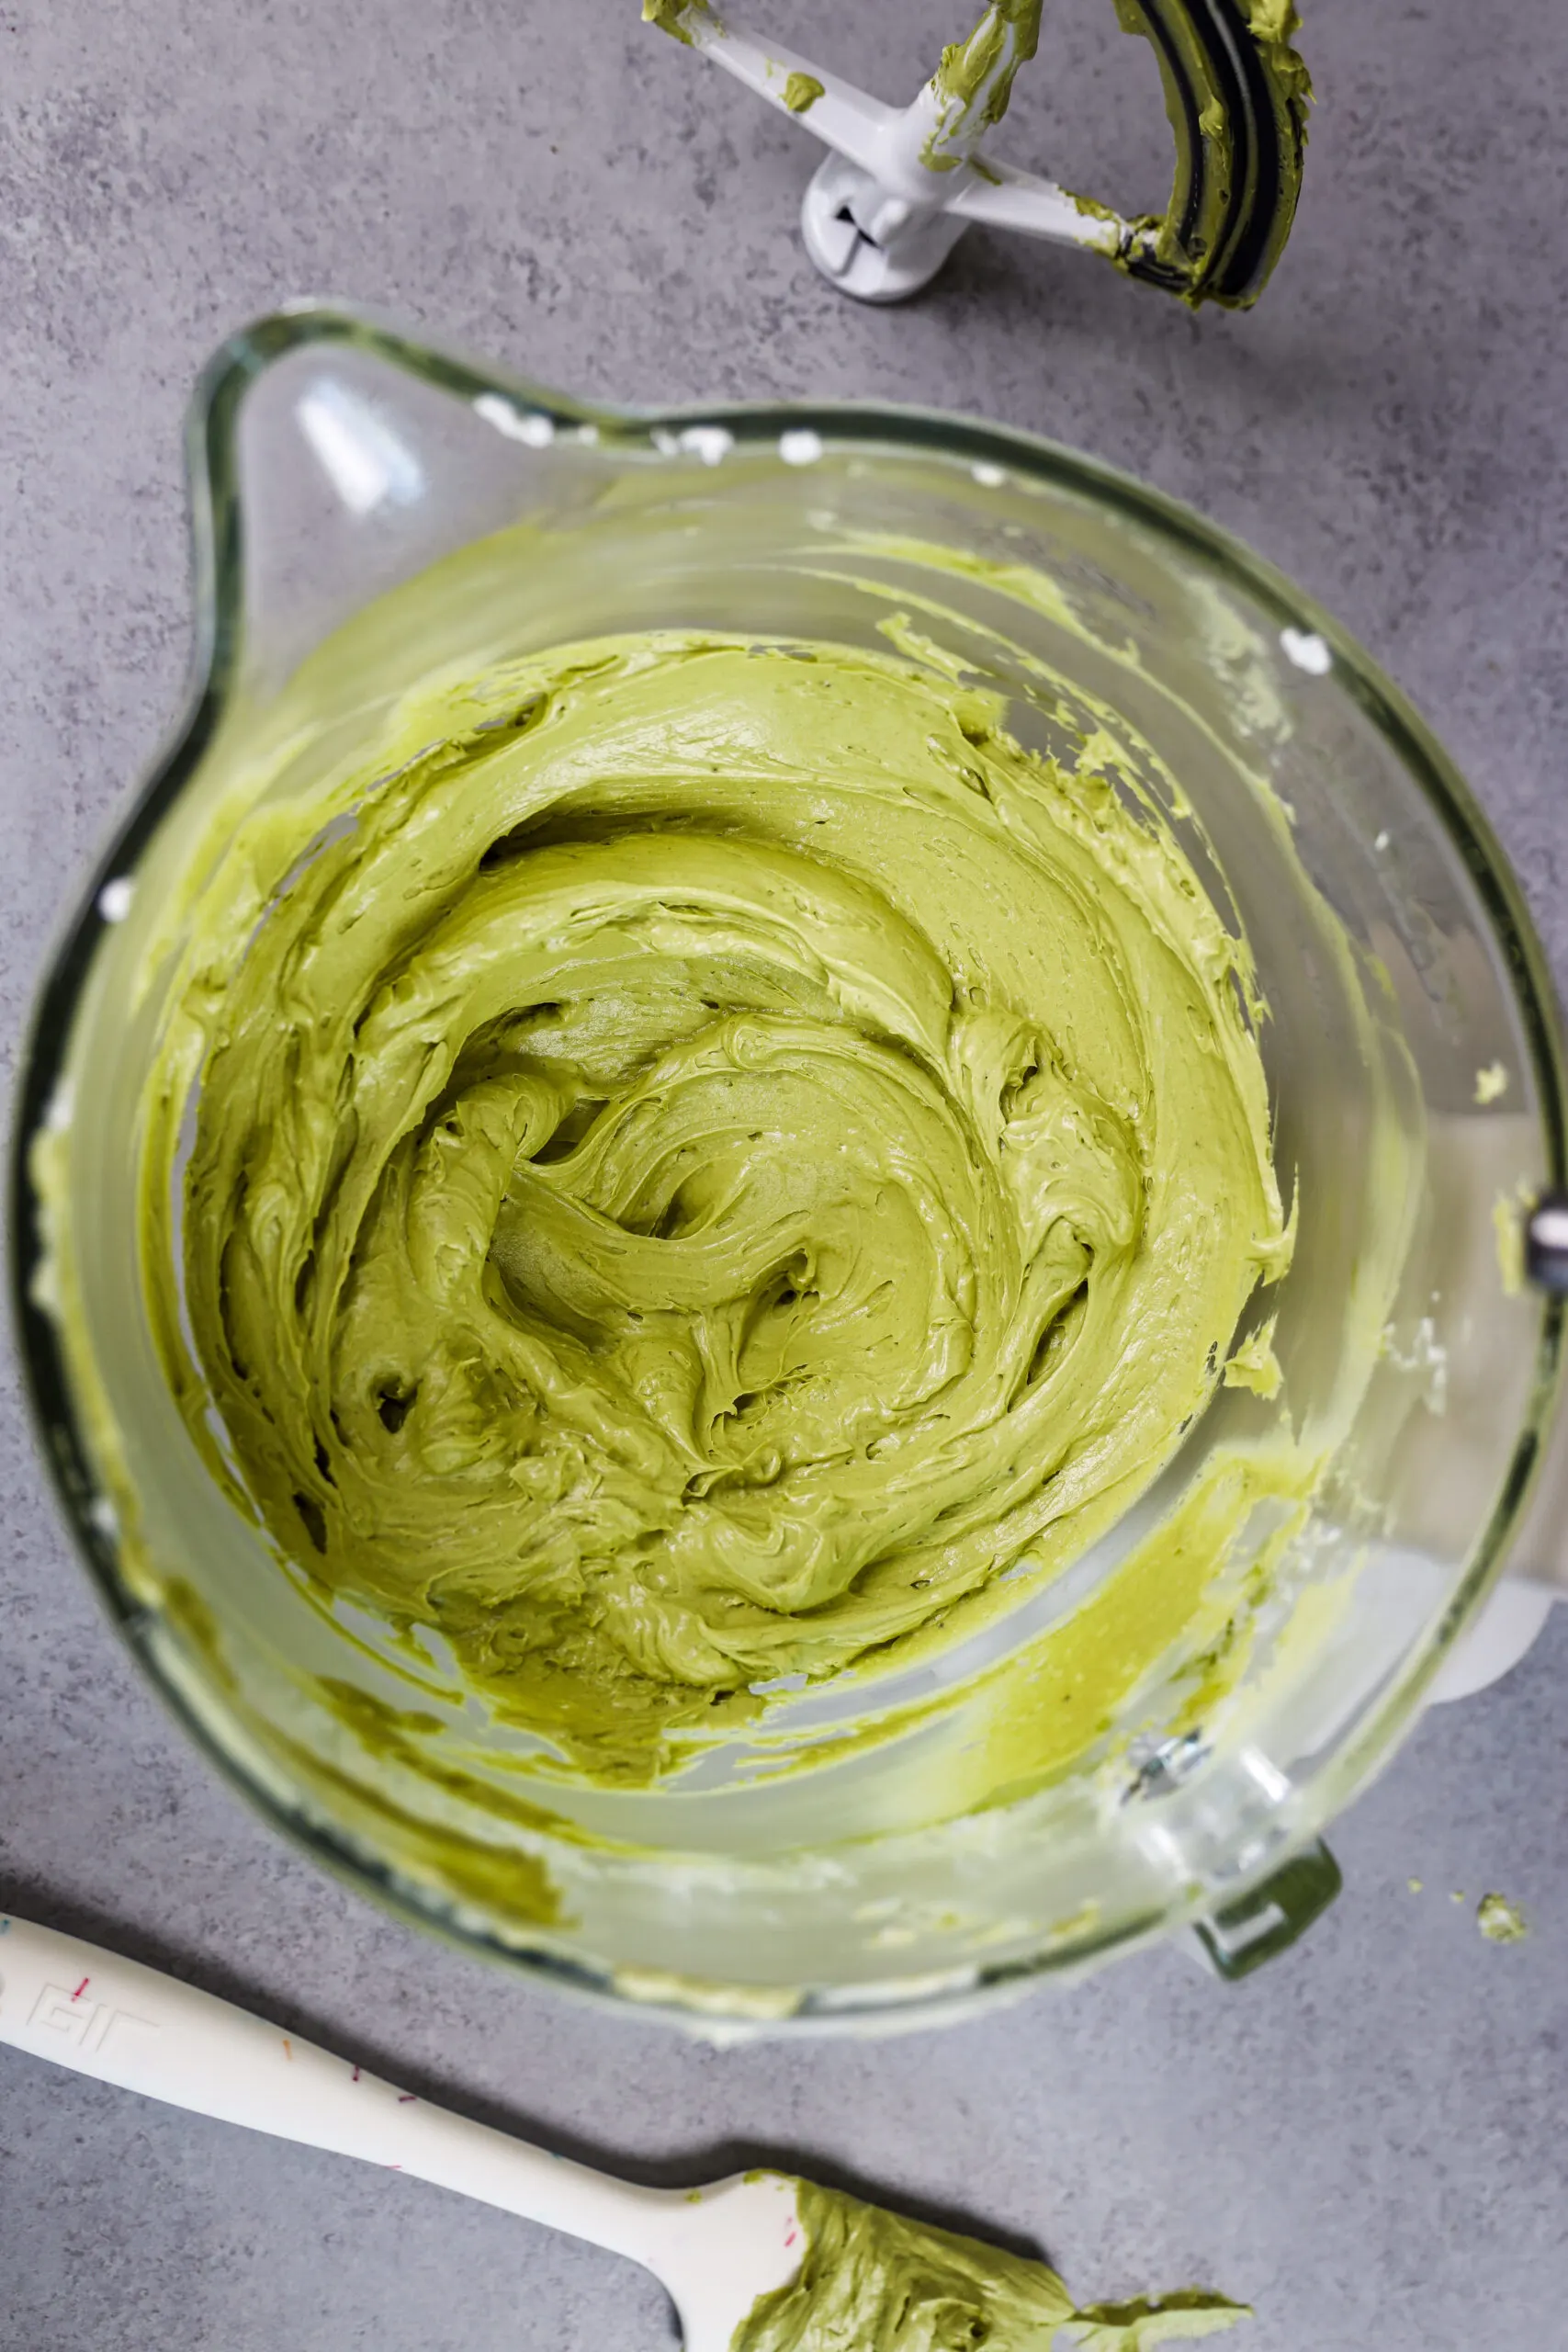 image of matcha buttercream that's been mixed in a large mixing bowl and is ready to be used to frost cupcakes or a cake